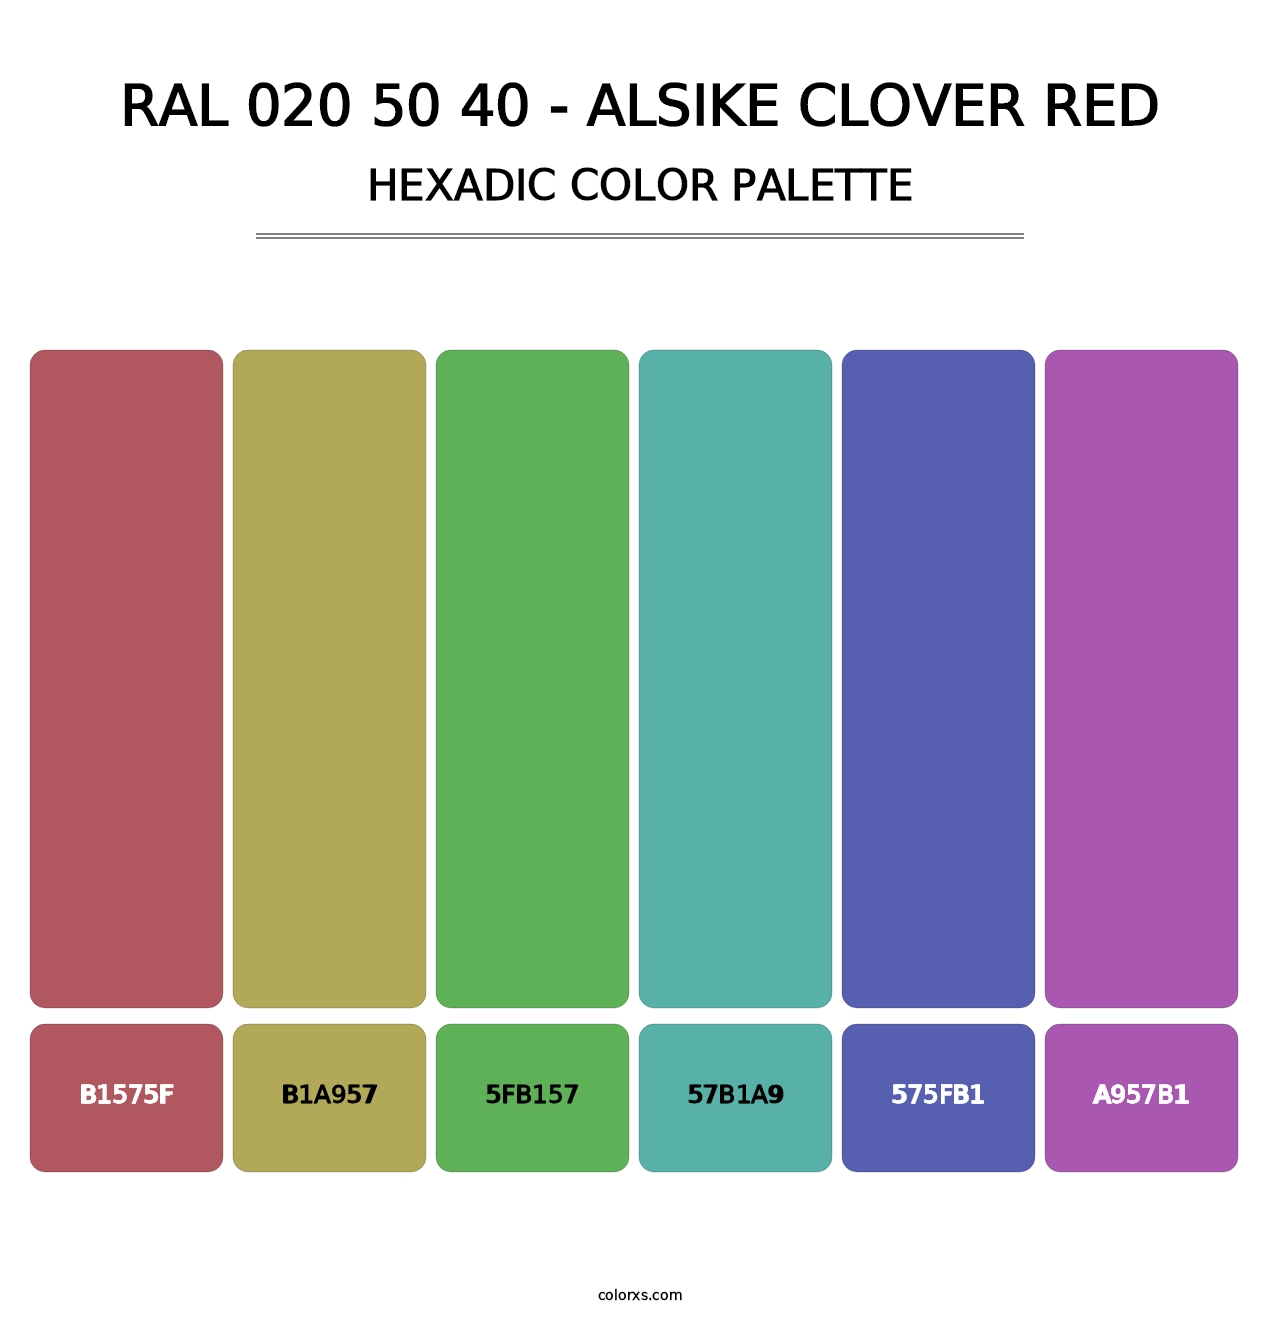 RAL 020 50 40 - Alsike Clover Red - Hexadic Color Palette